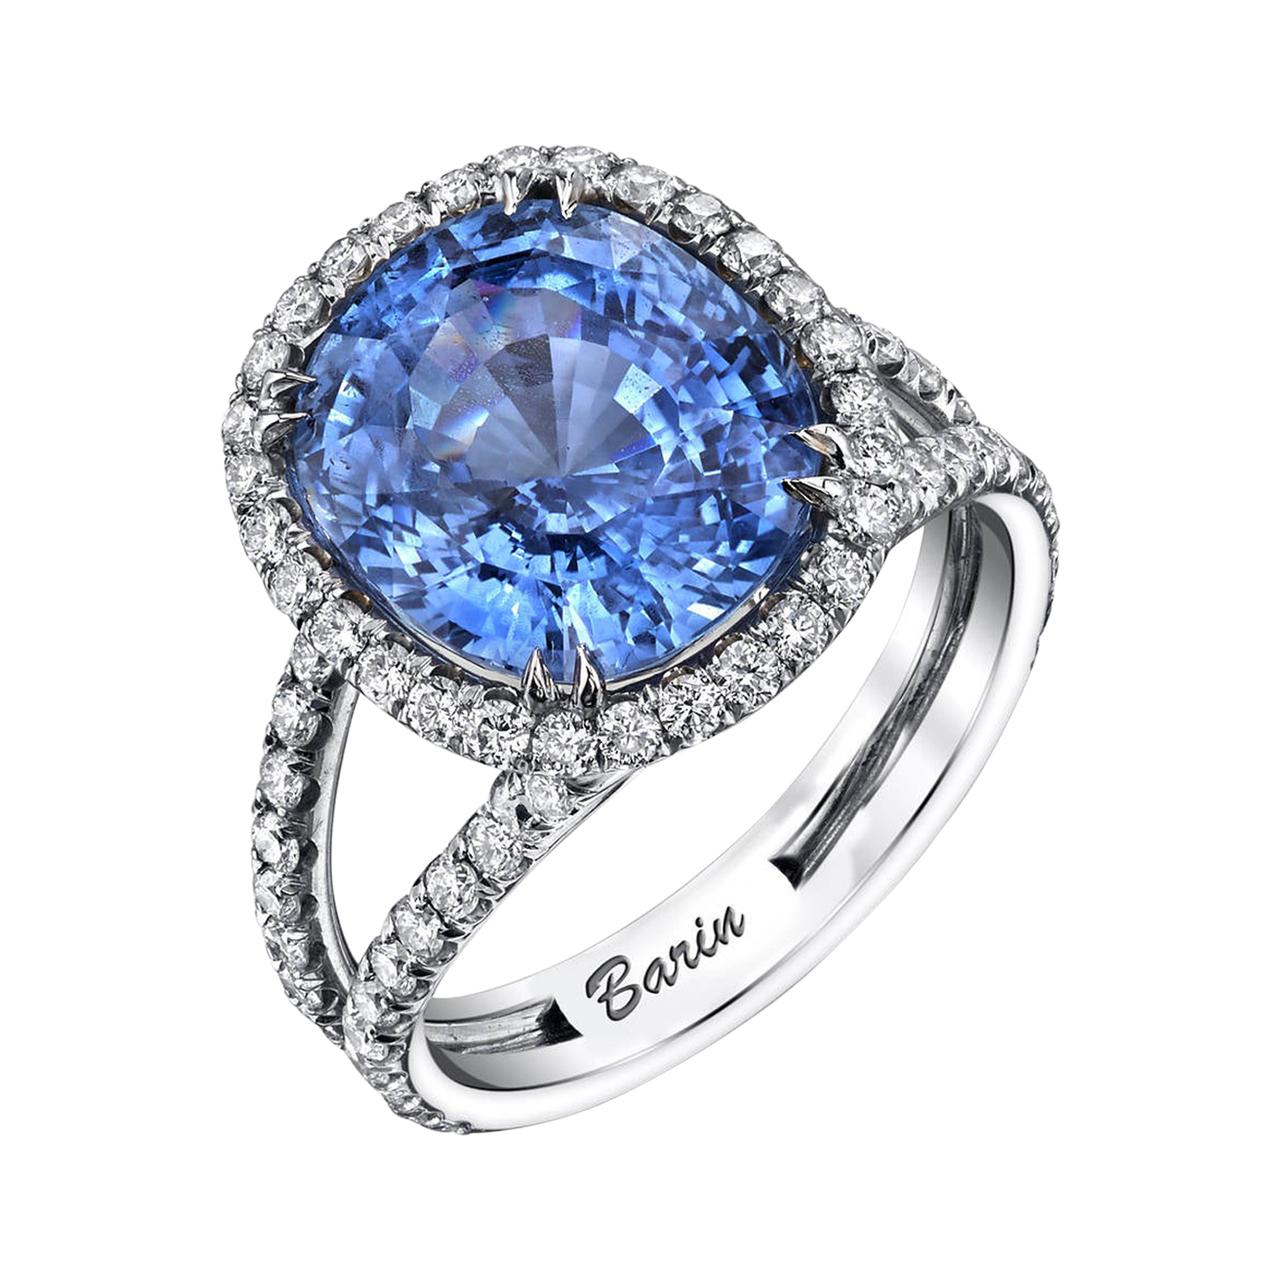 8.66ct. Cornflower Blue Sapphire accented with 1.07ct Diamonds Set in 18KW